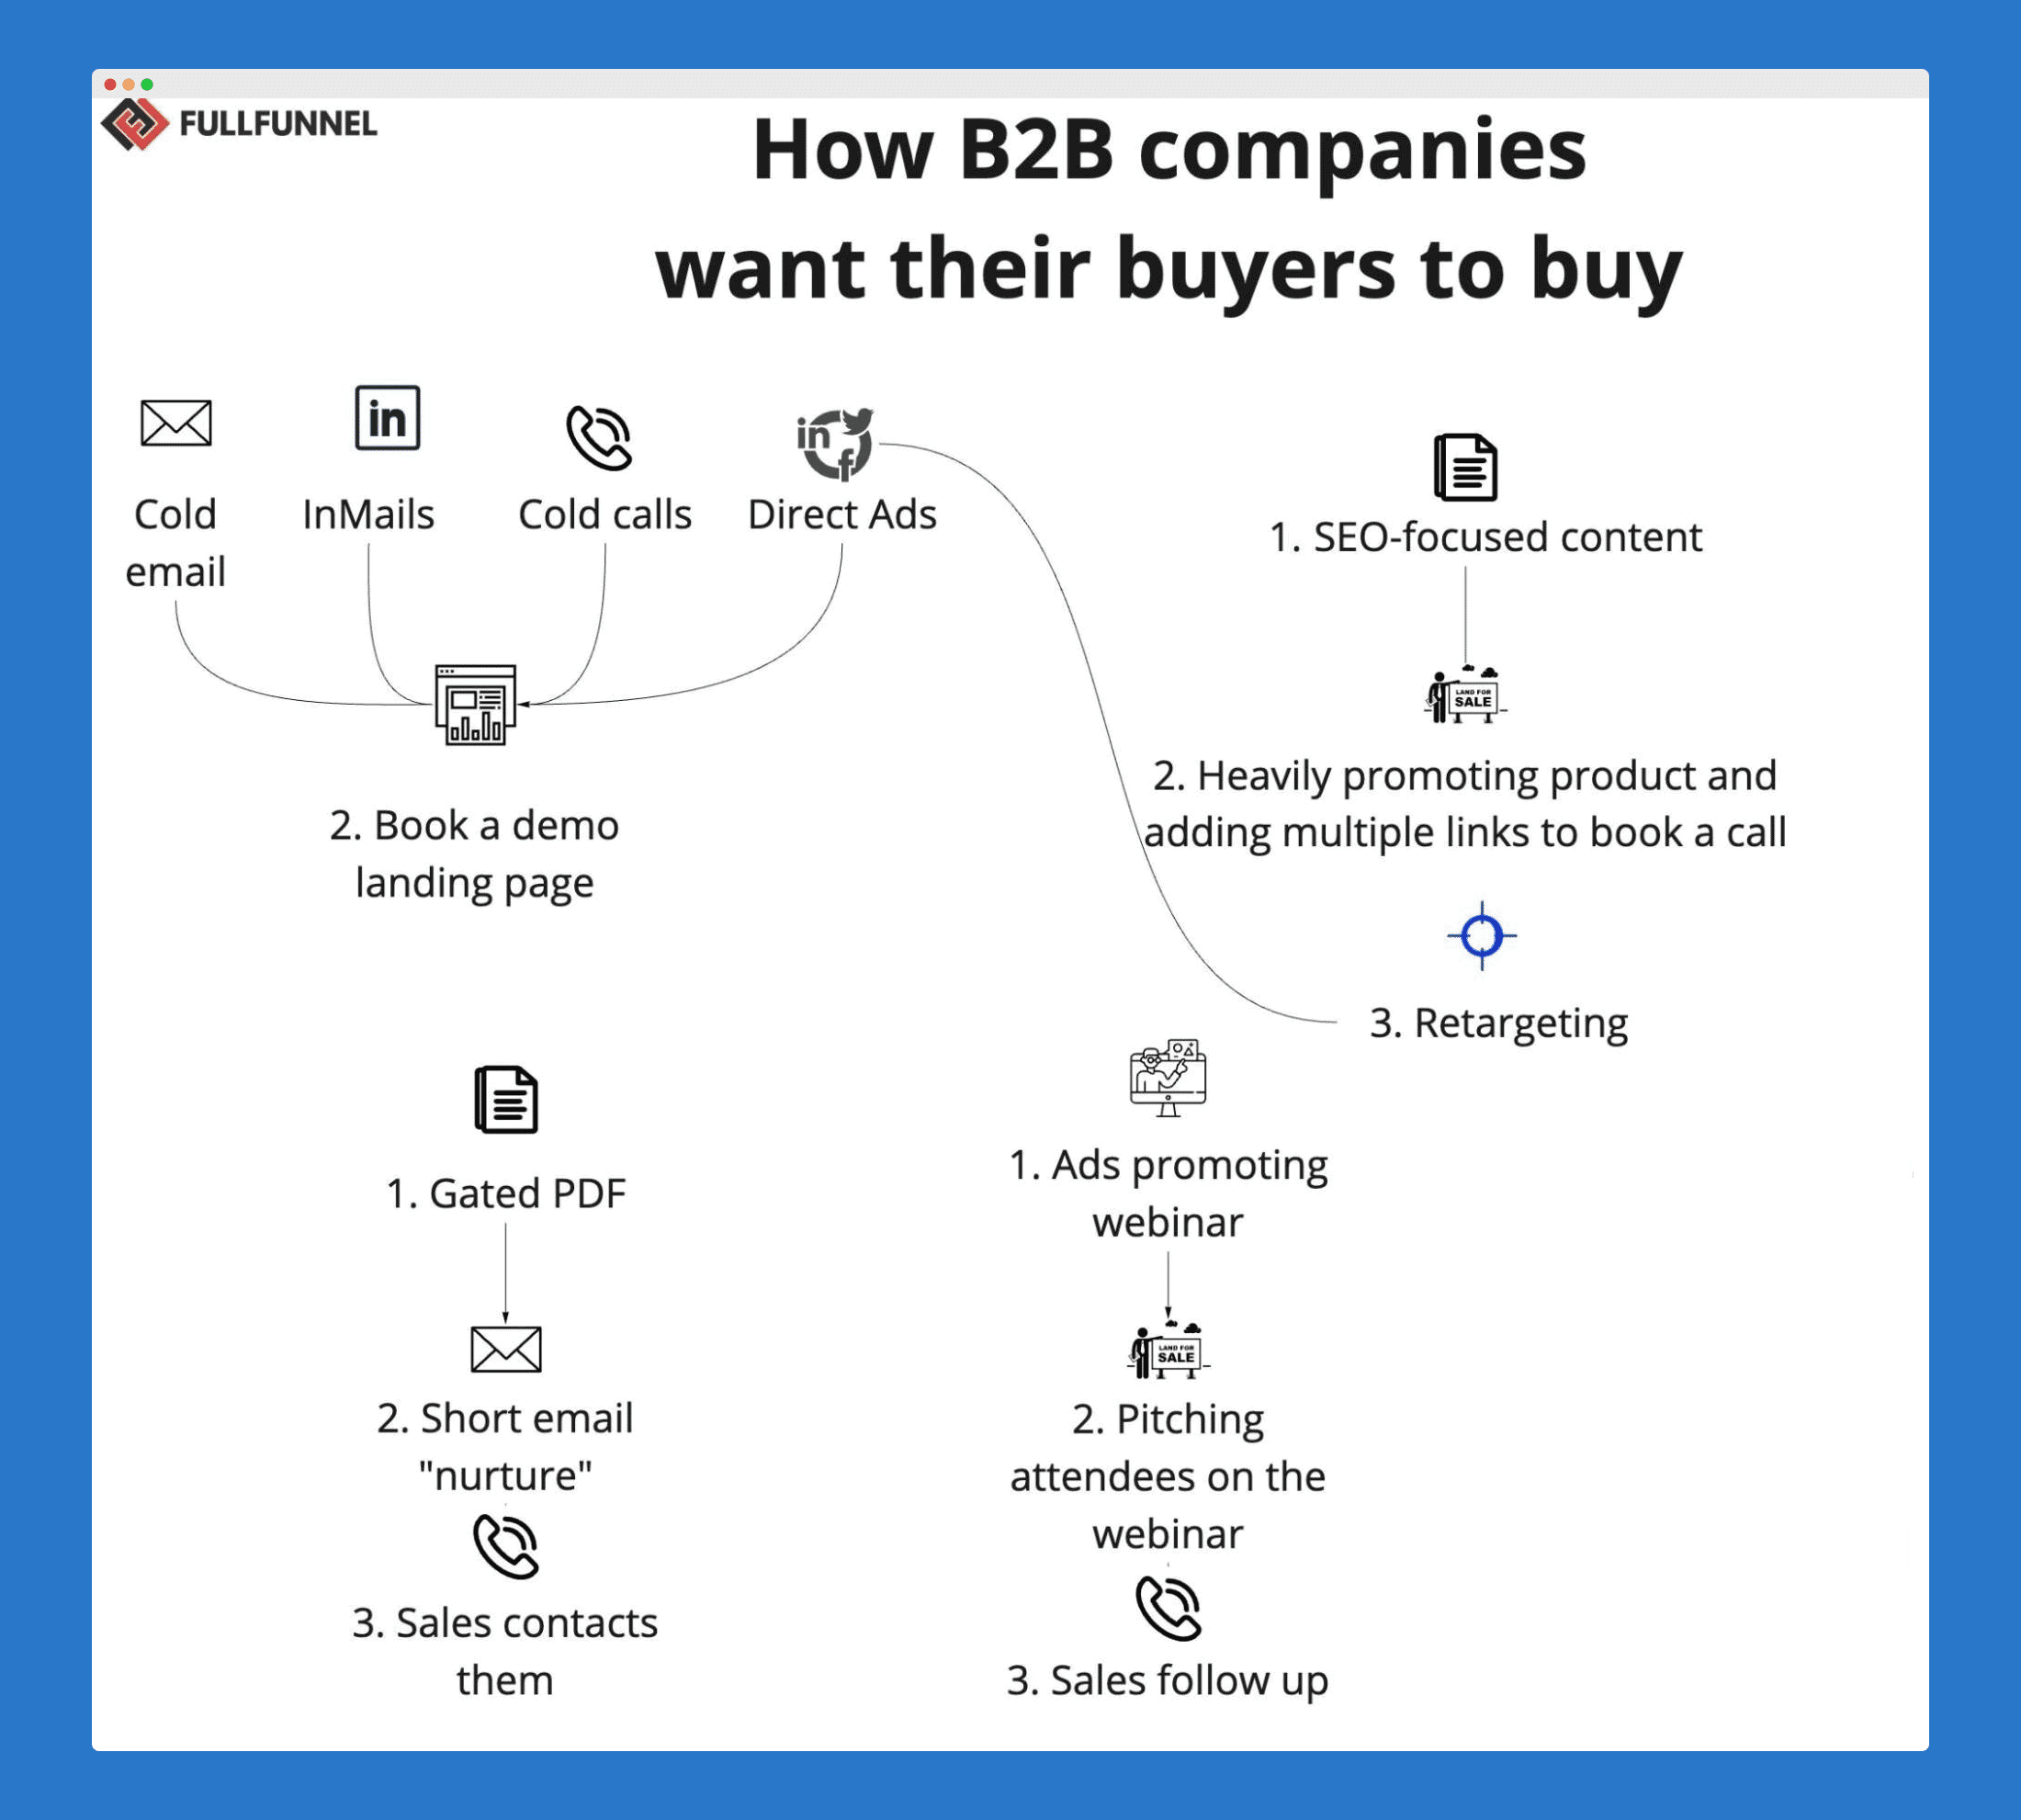 GTM strategy for B2B companies